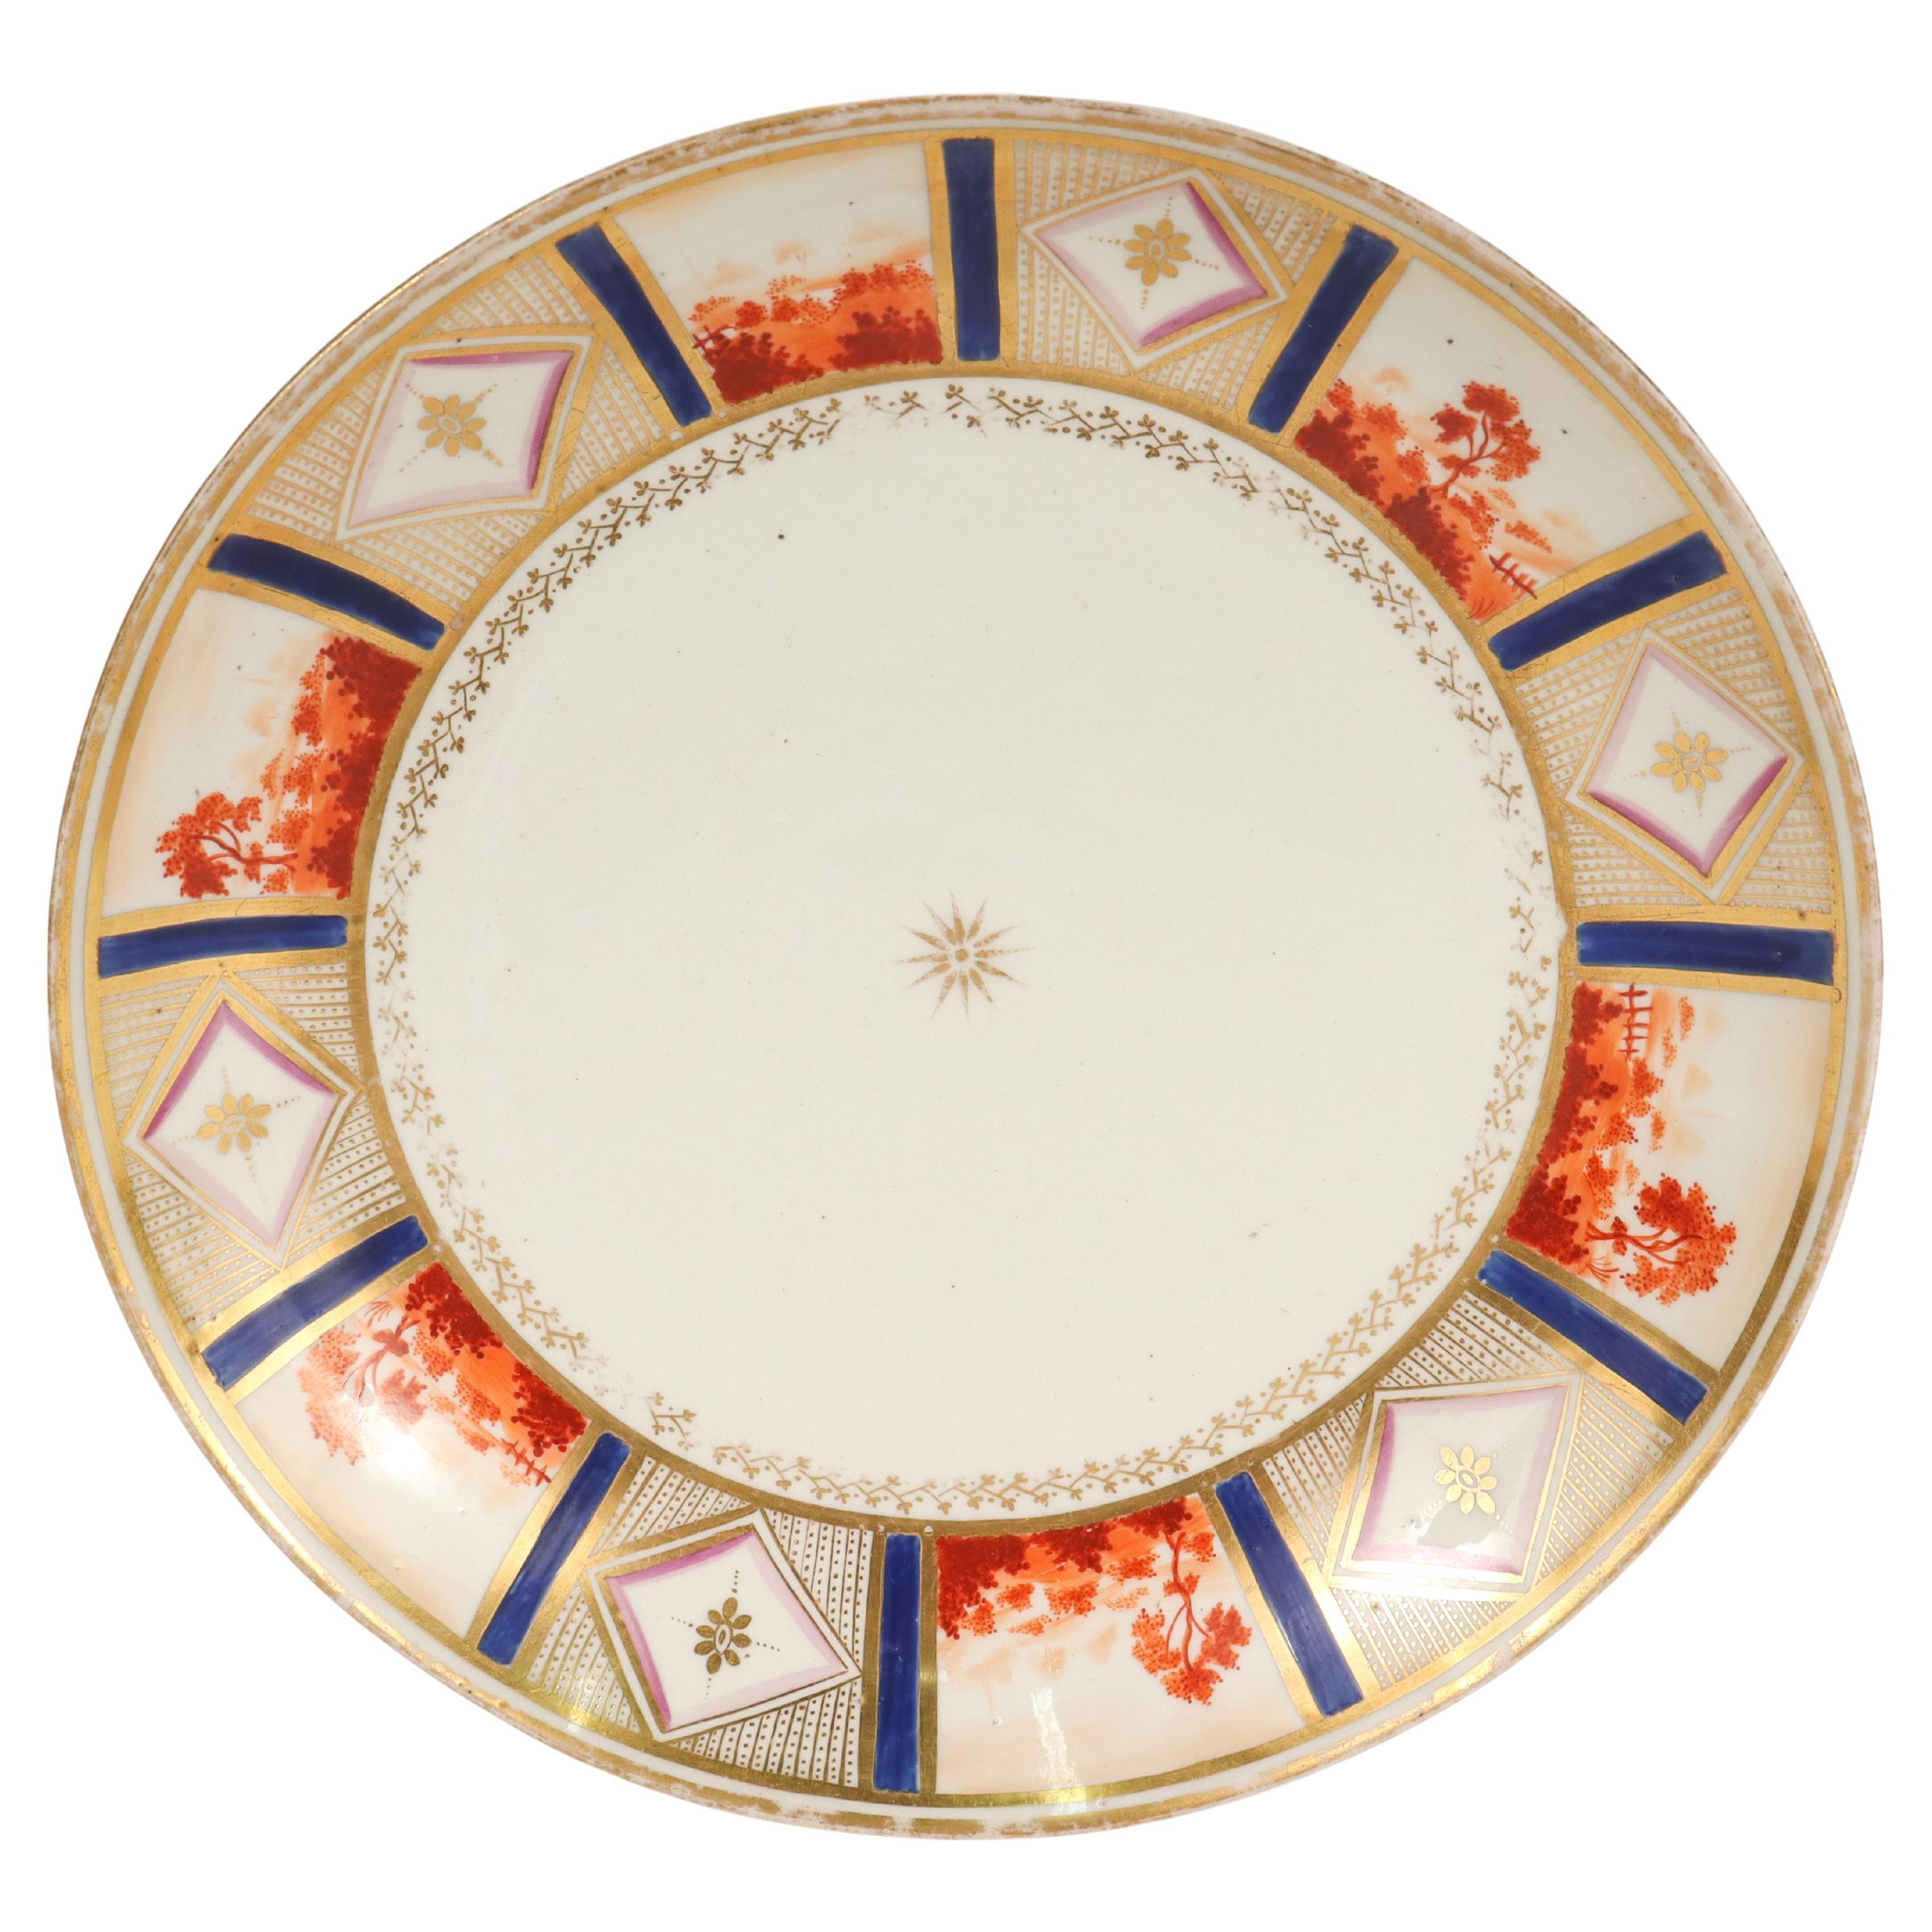 Antique New Hall English Porcelain Dish or Plate Pattern 435, PC For Sale